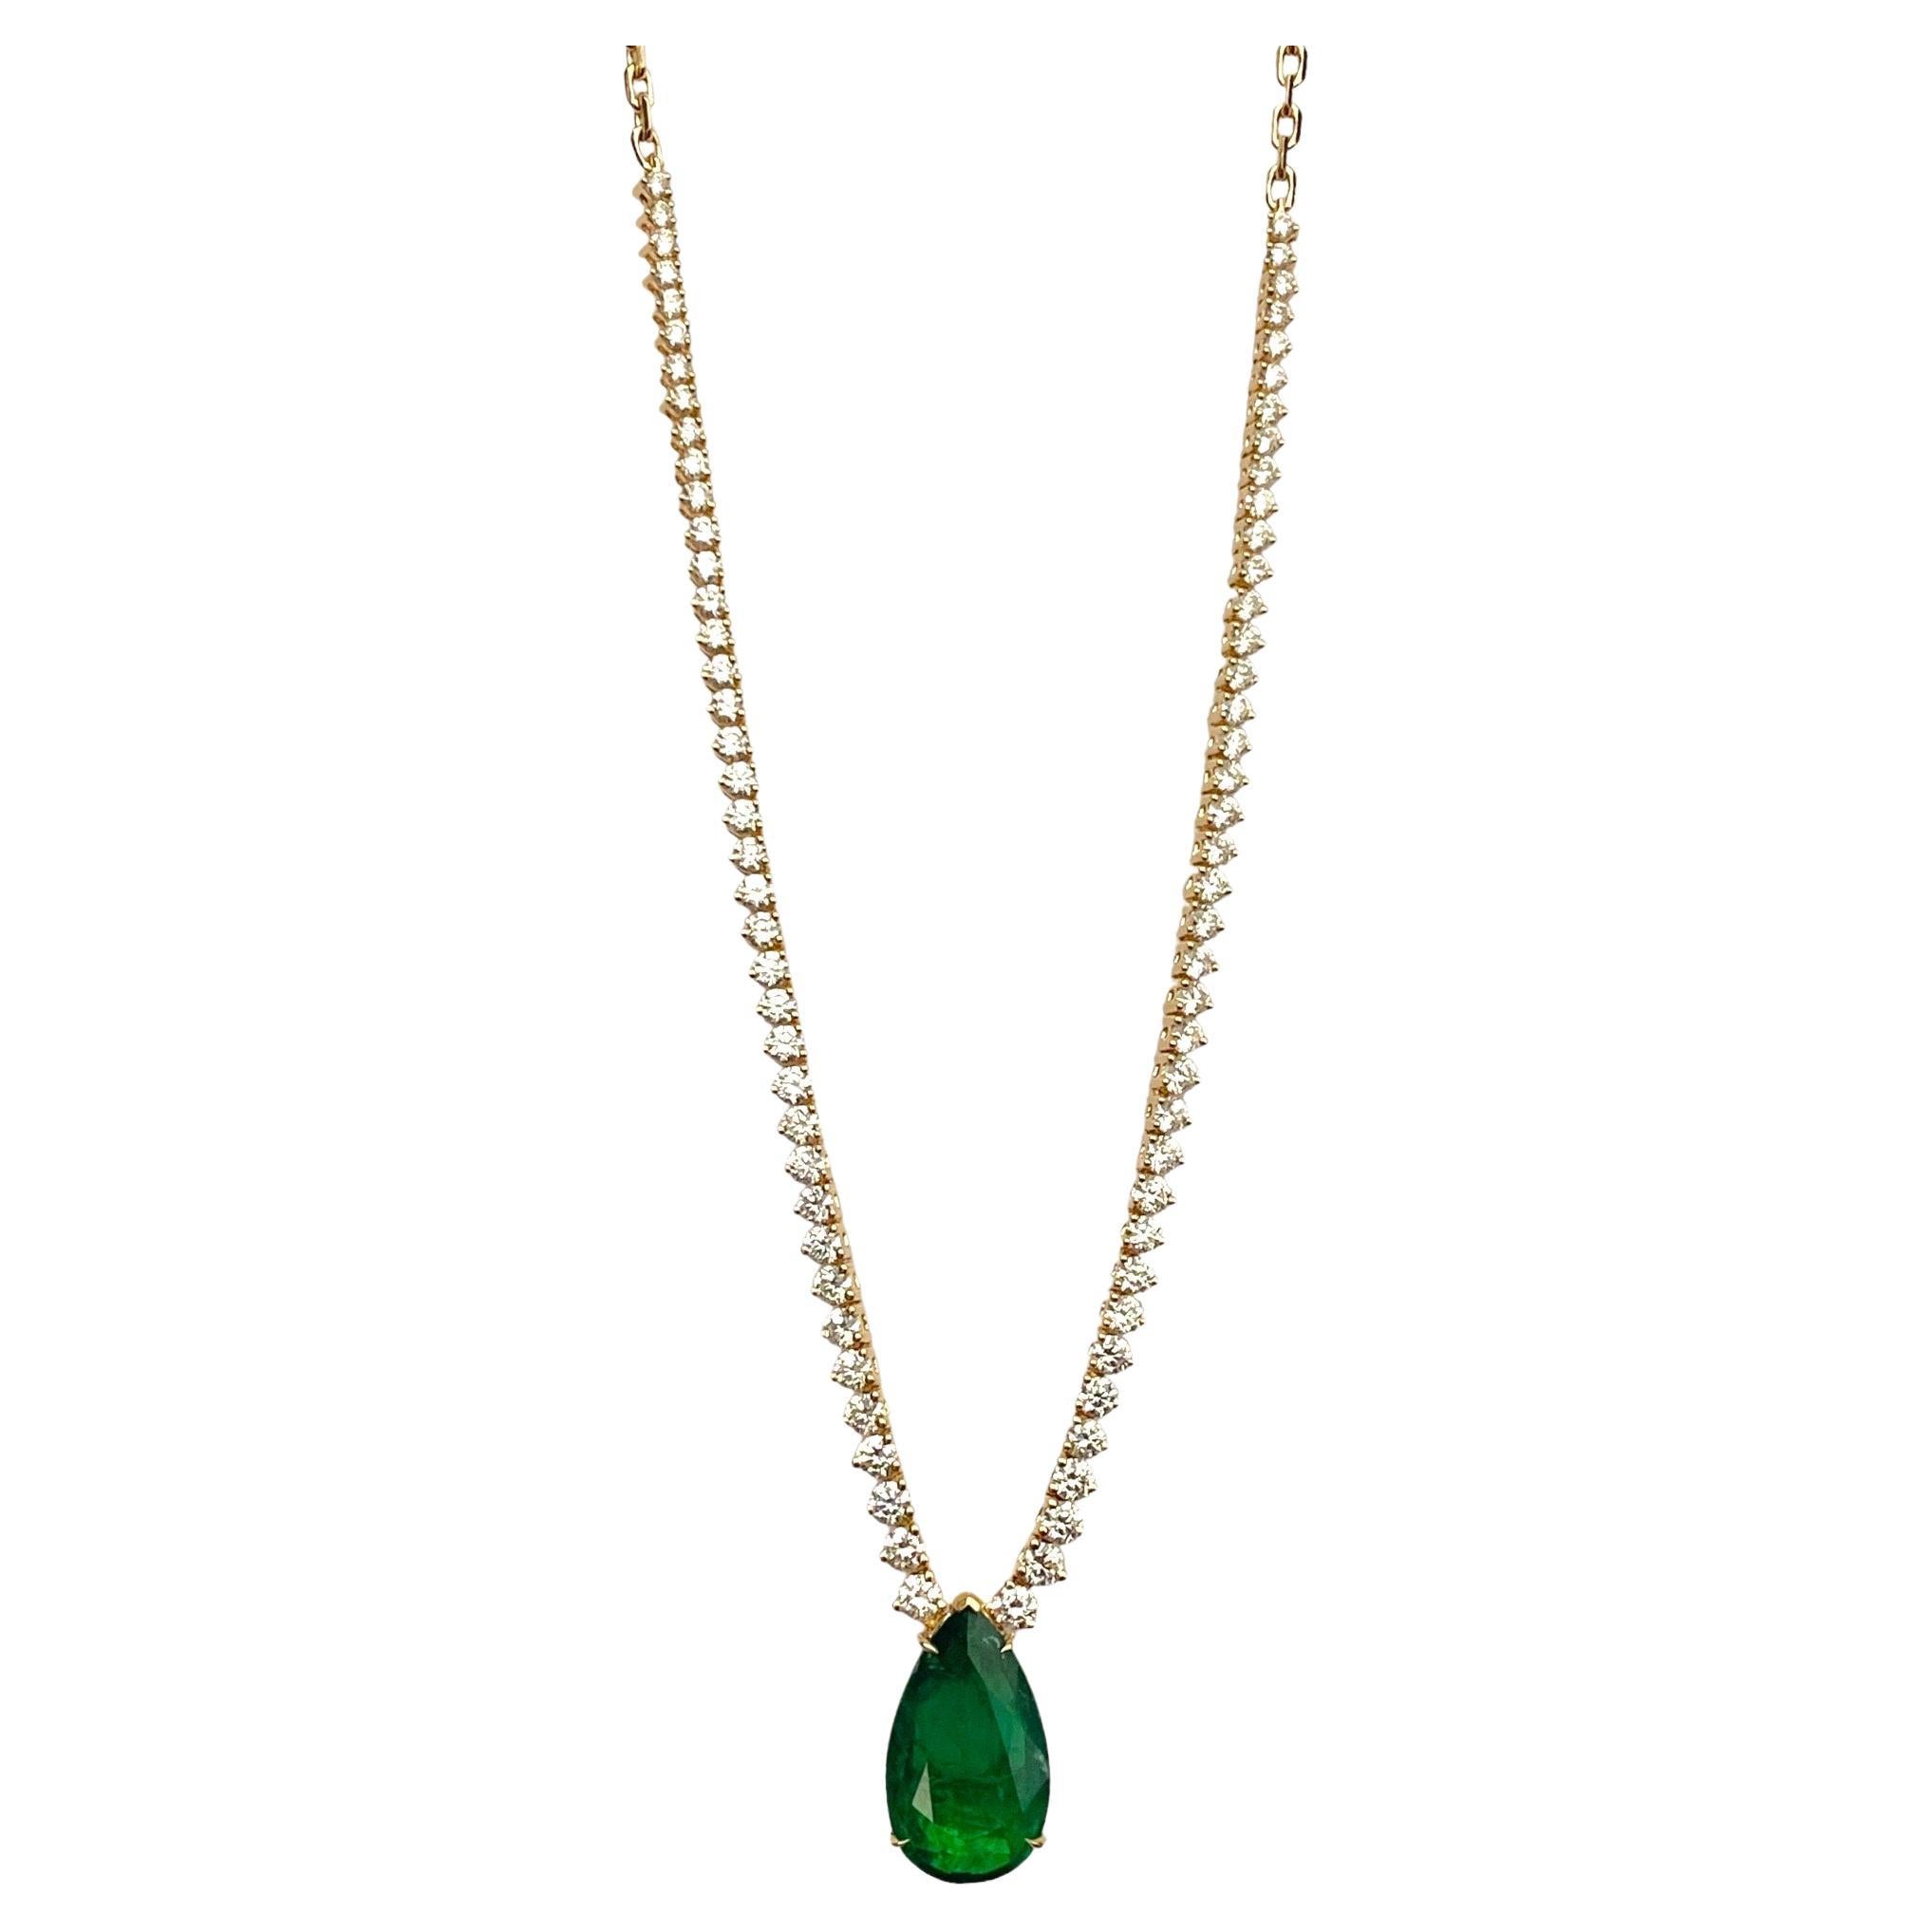 Statement 7.3 ct Pear shaped Emerald and Graduated Diamond Necklace